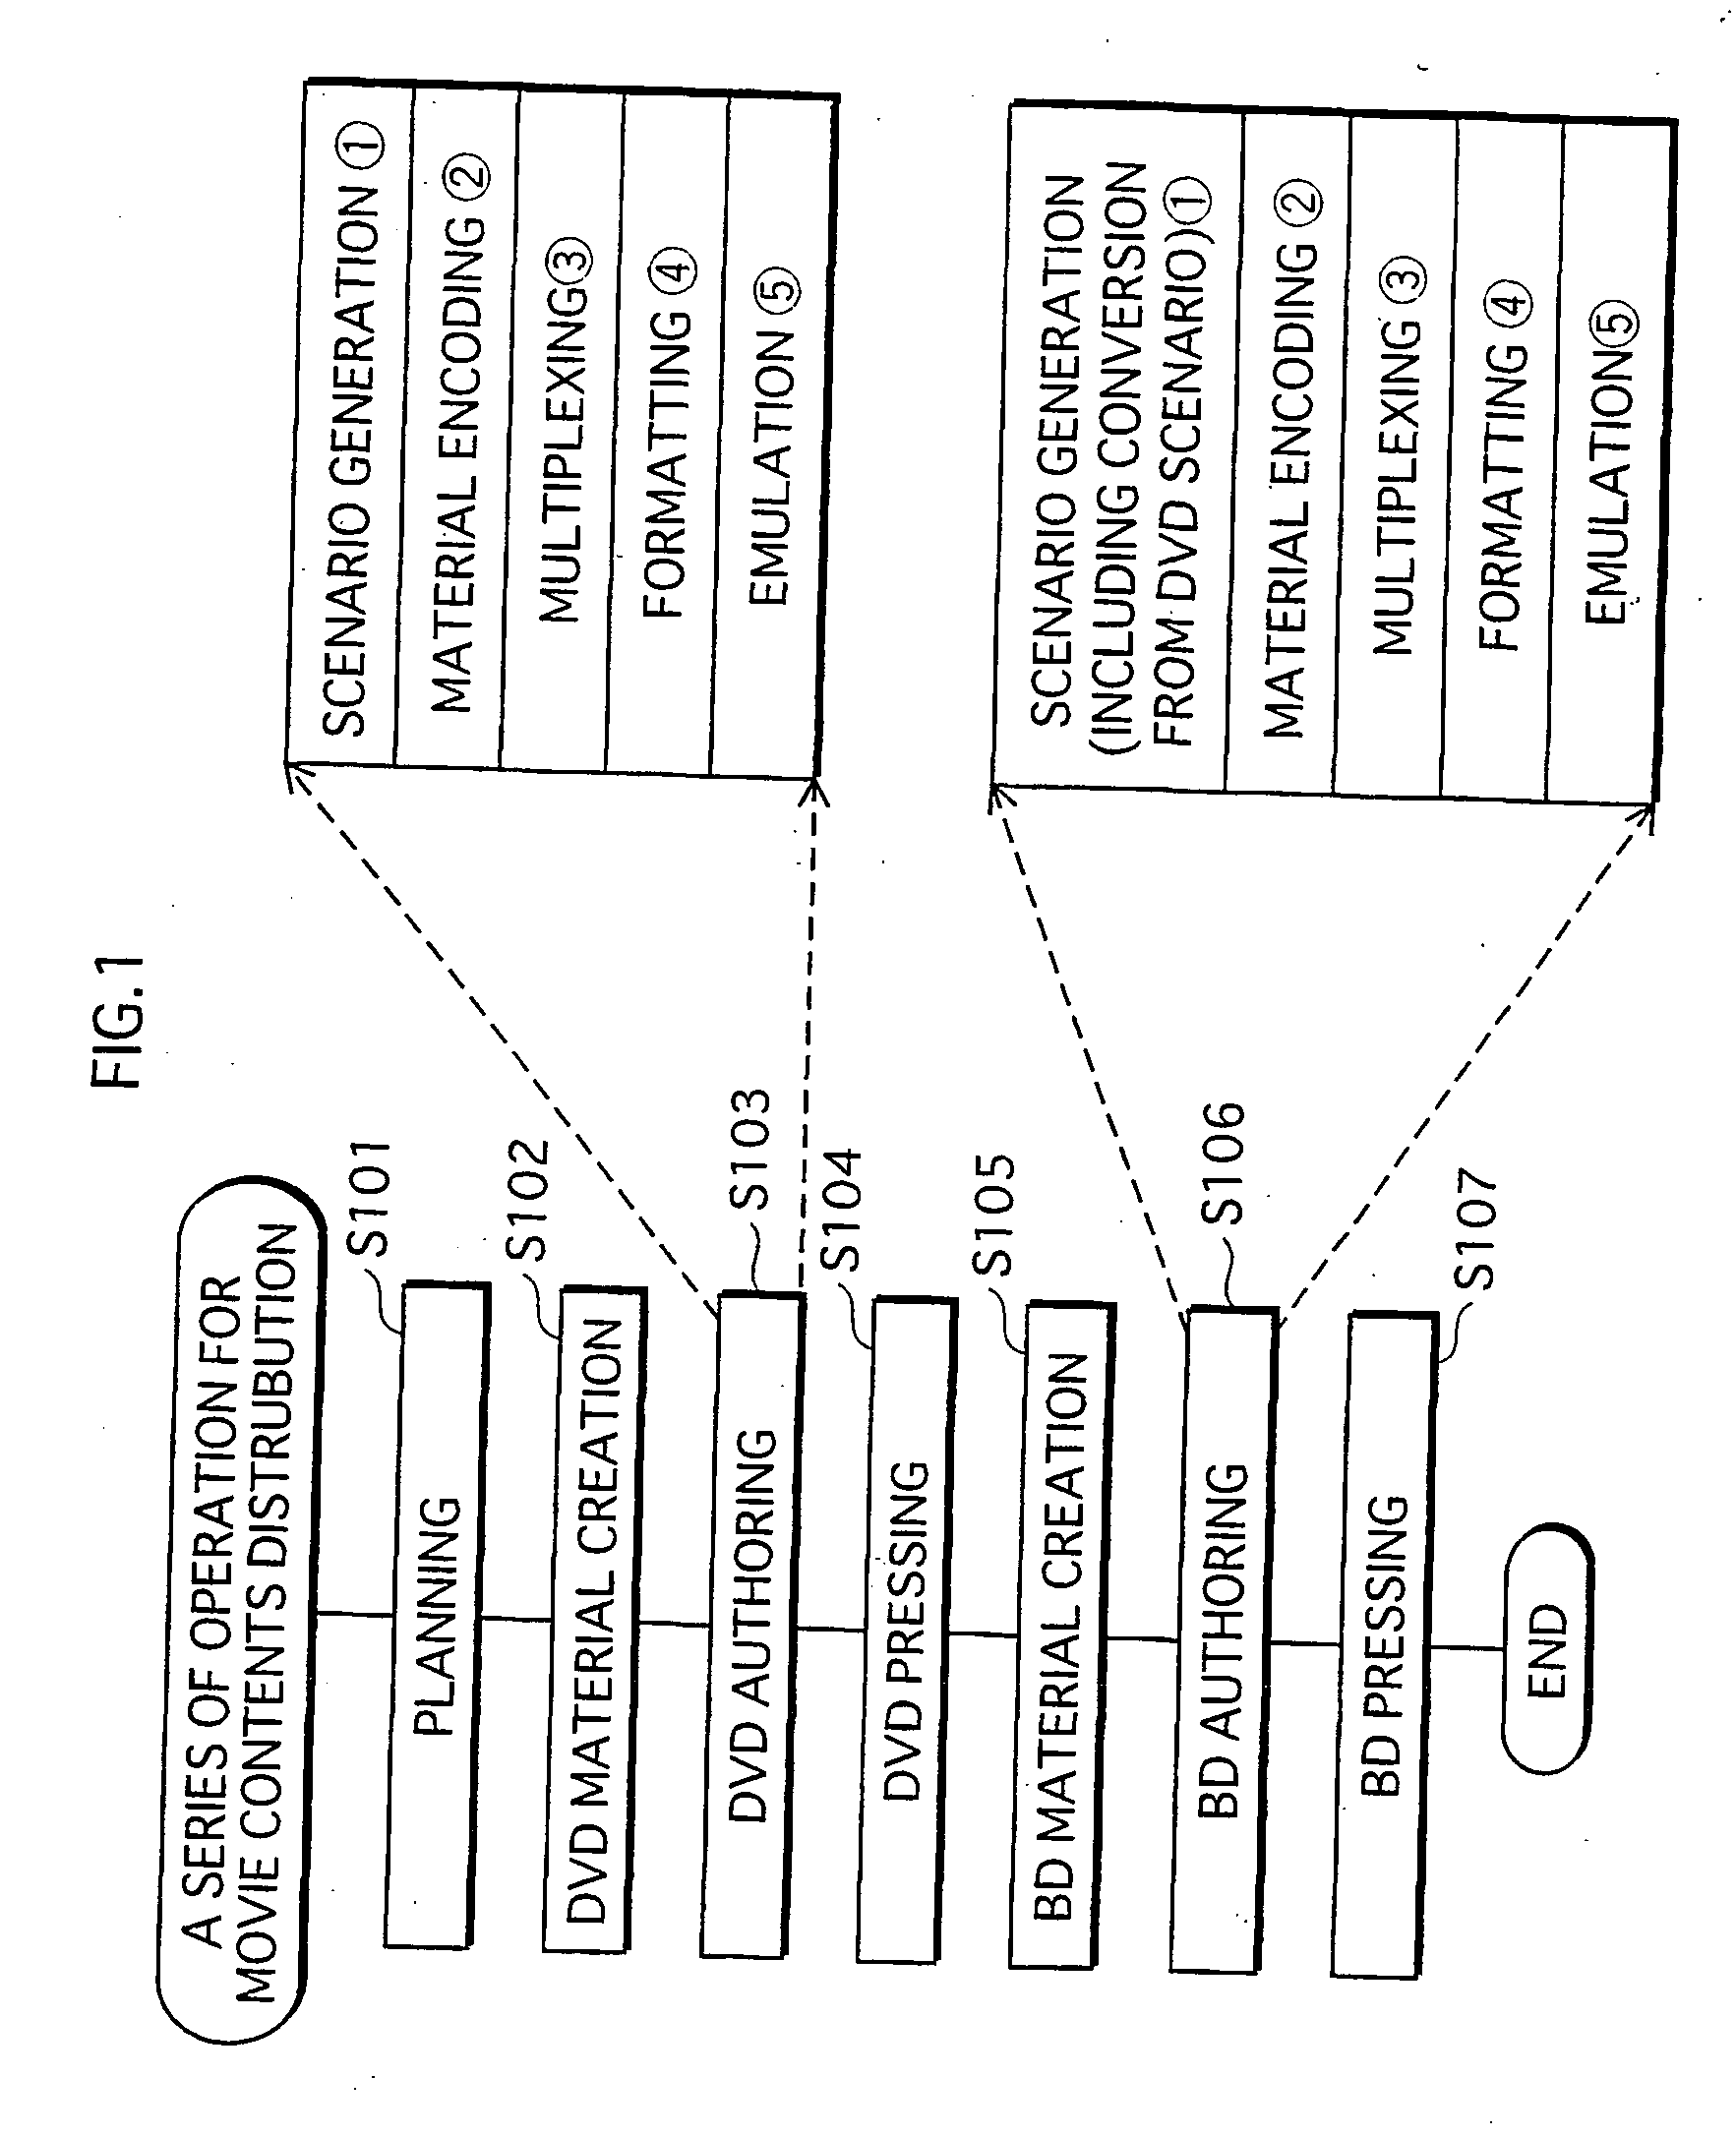 Apparatus and computer-readable program for program for generating volume image